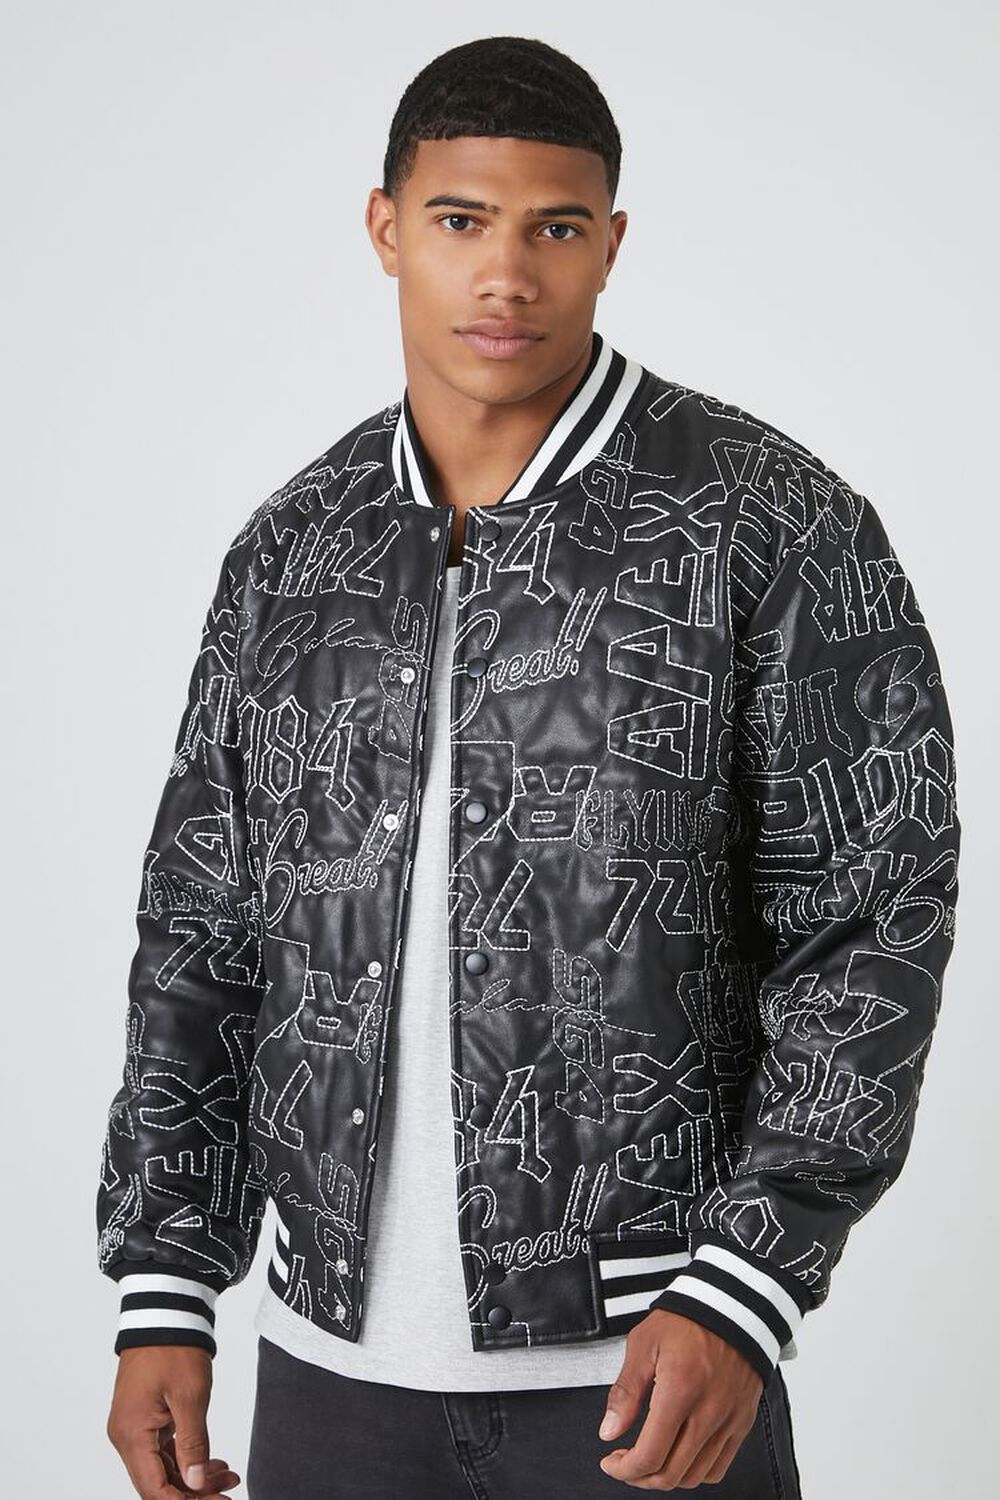 Mens Embroidered Varsity Jacket with Faux Leather Sleeves and